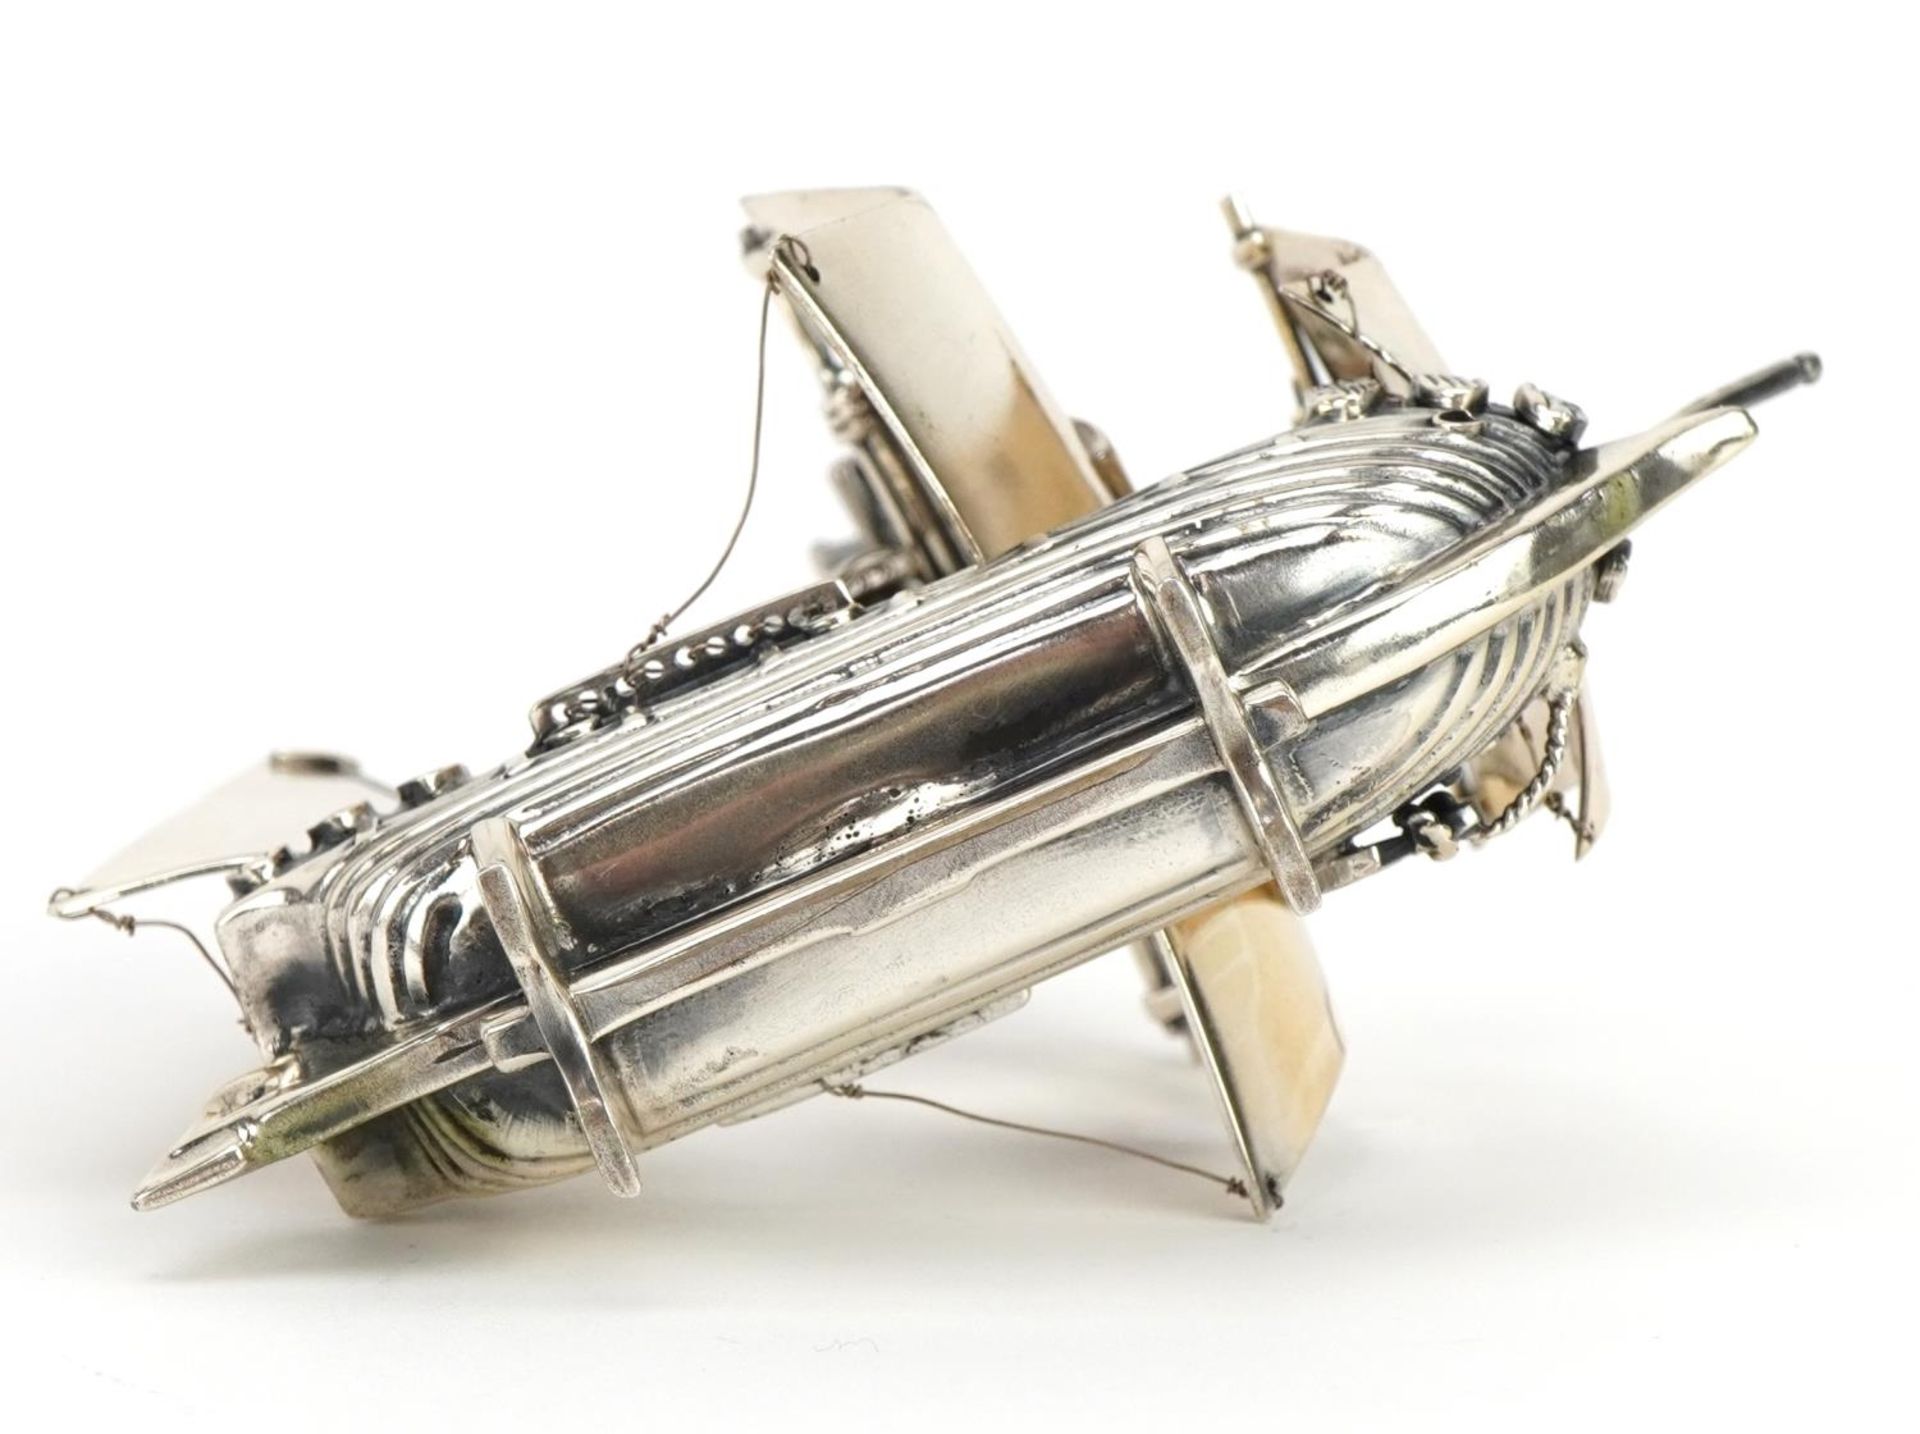 Heavy silver model of a rigged sailing ship, M N maker's mark, Birmingham 2000, 11cm high, 172.8g - Image 3 of 4